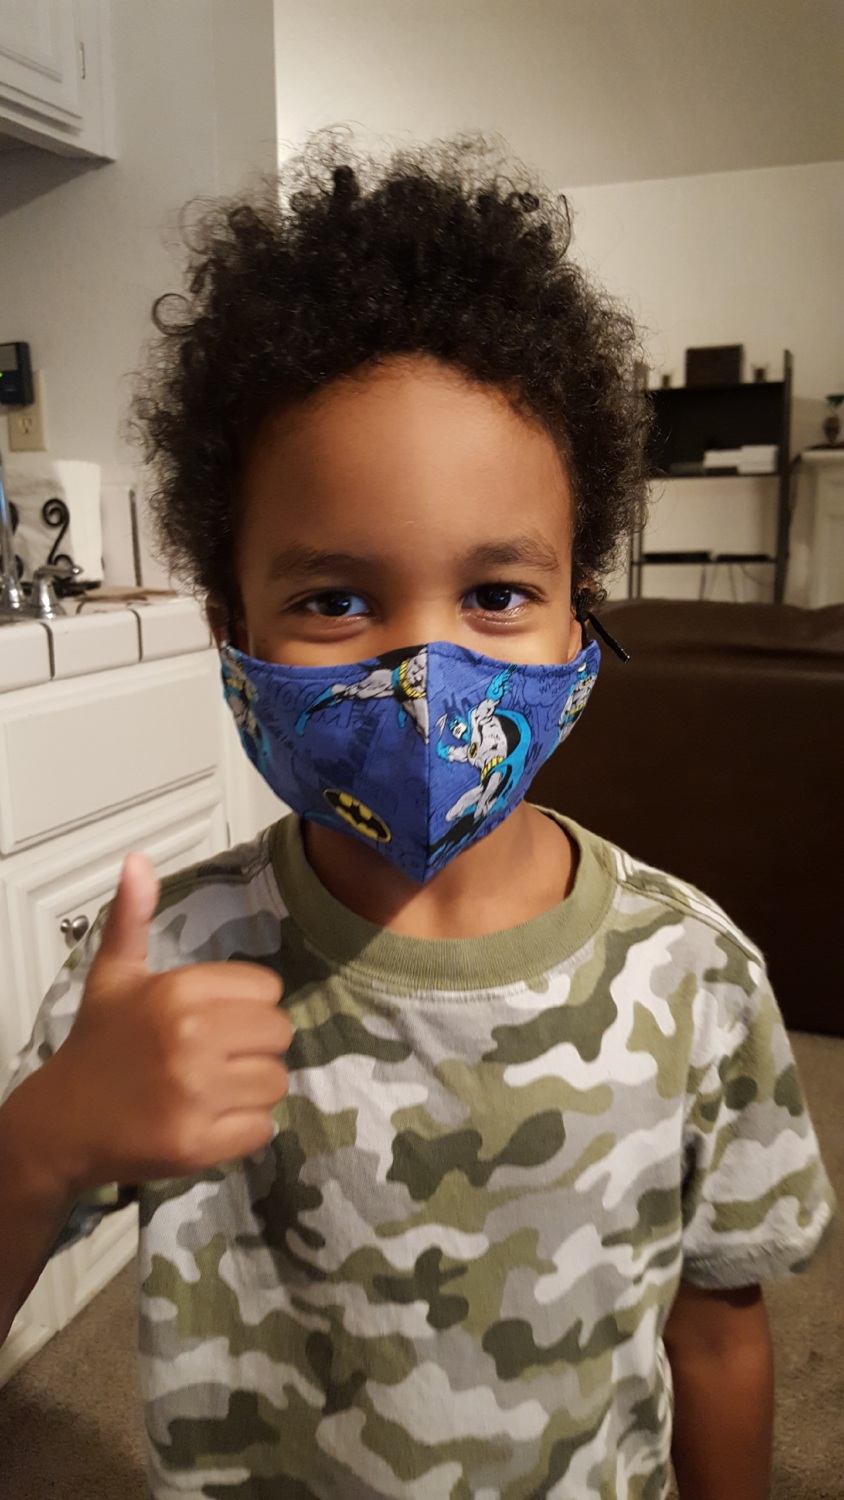 PHI's Stephanie's youngest son wearing a face mask